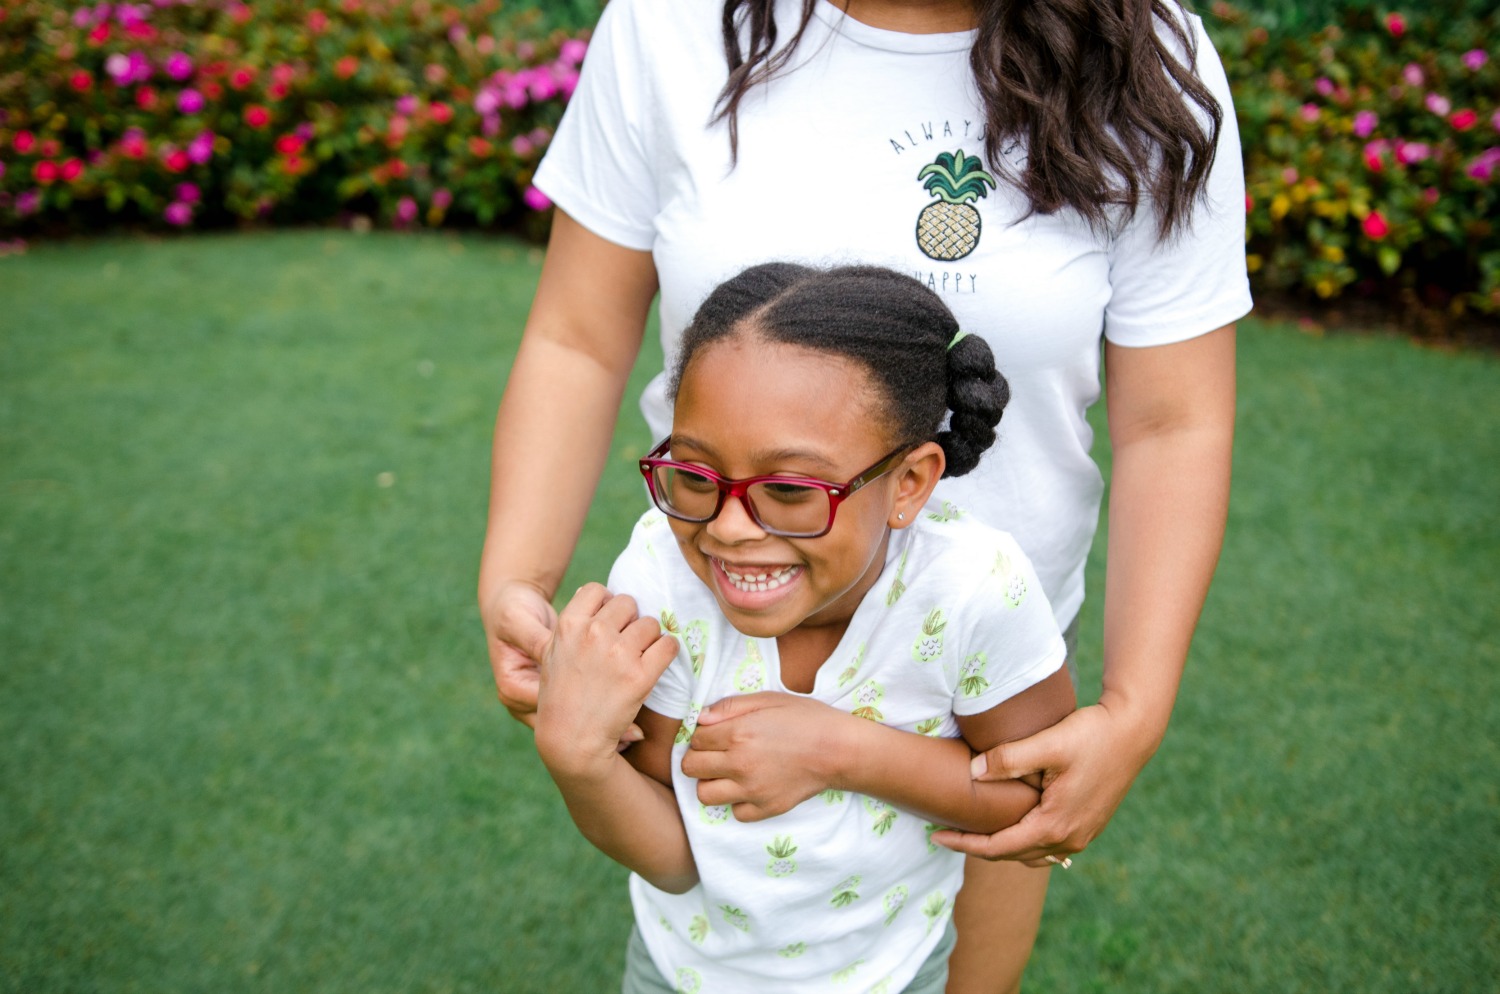 Millennial mom and Orlando lifestyle blogger Bianca Dottin shares how to shop for and style mama + me matching summer outfits.